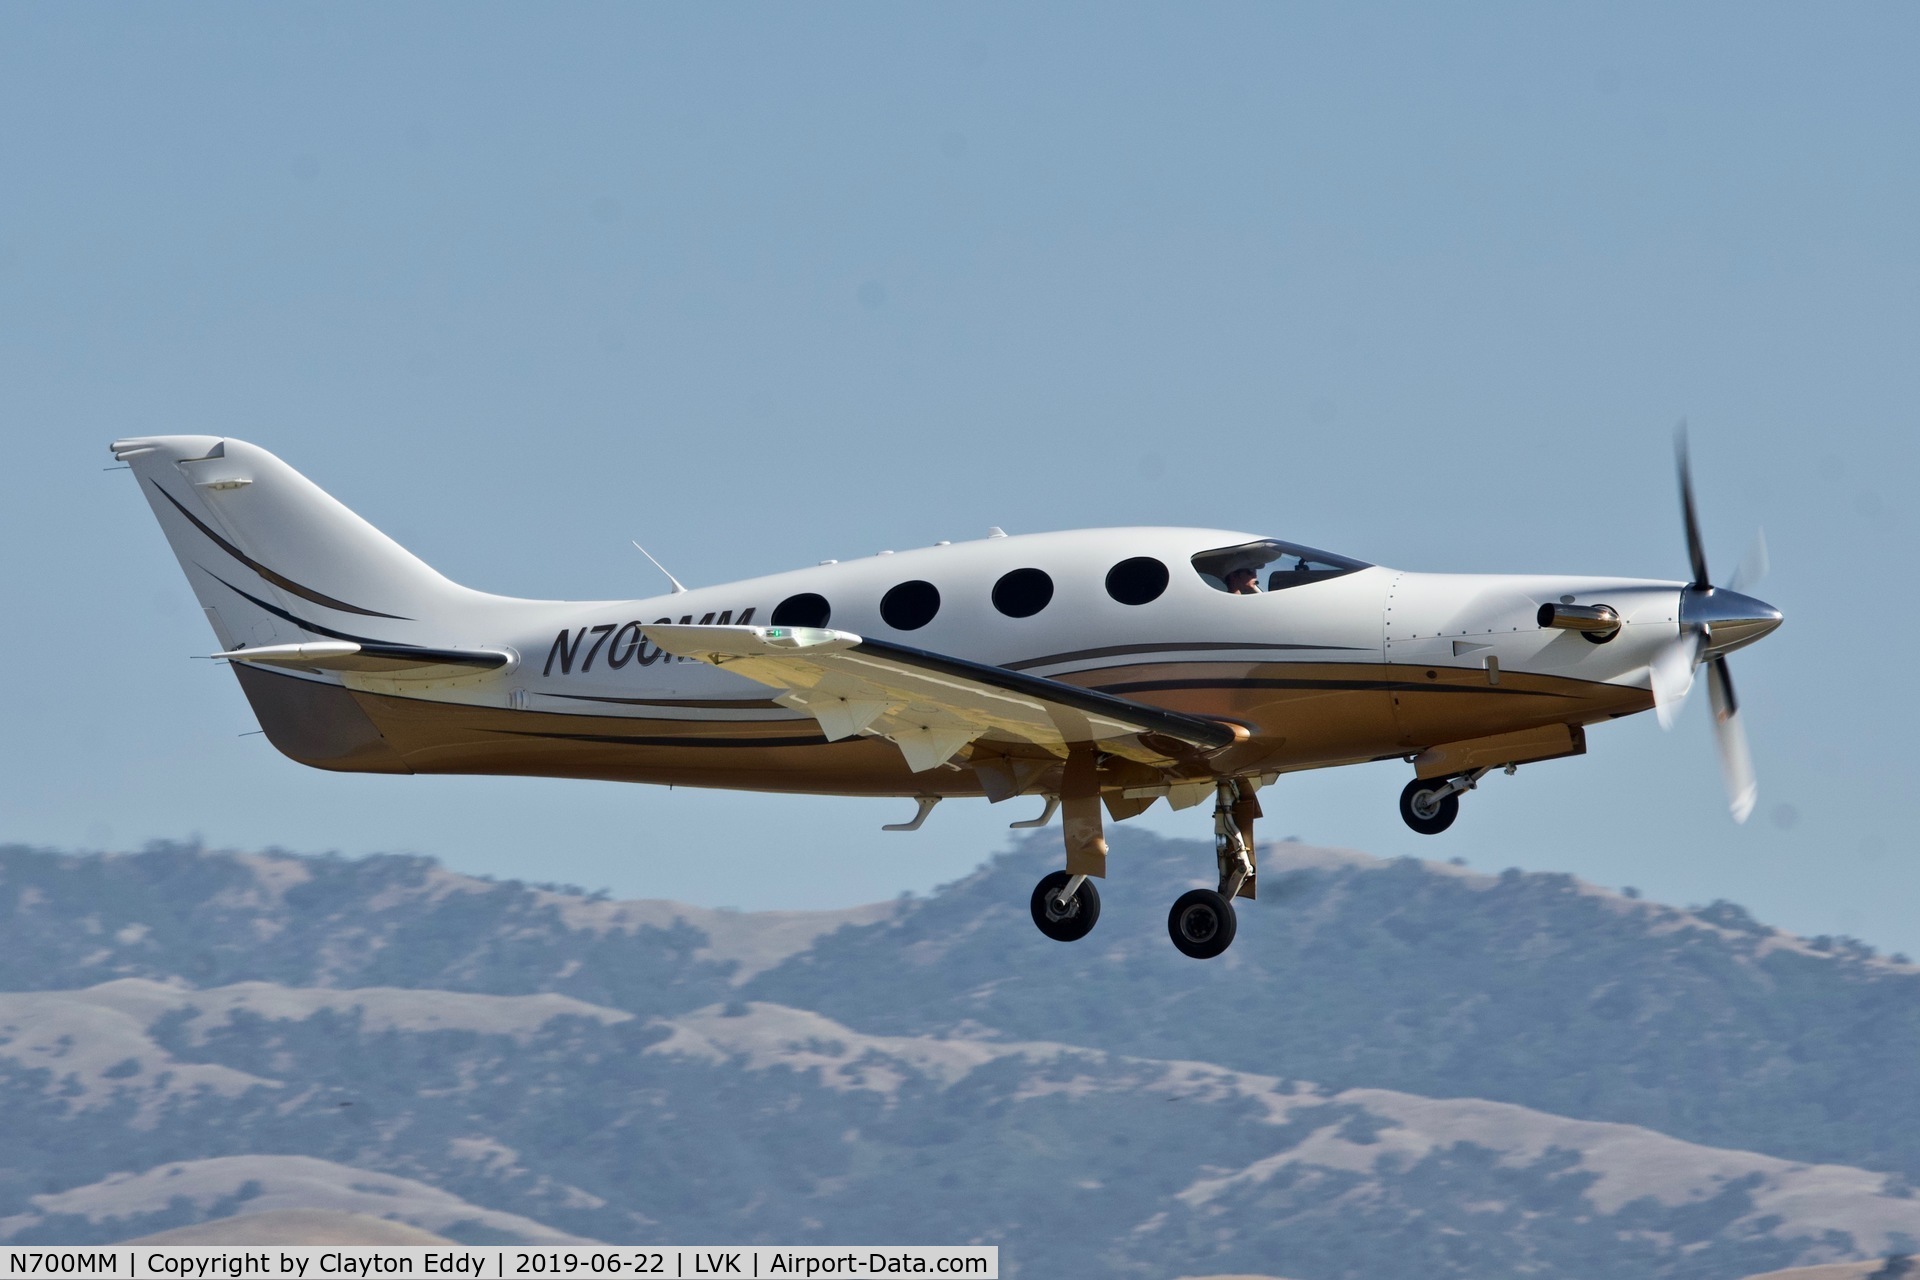 N700MM, 2006 Epic LT Dynasty C/N 010, Livermore Airport California 2019.